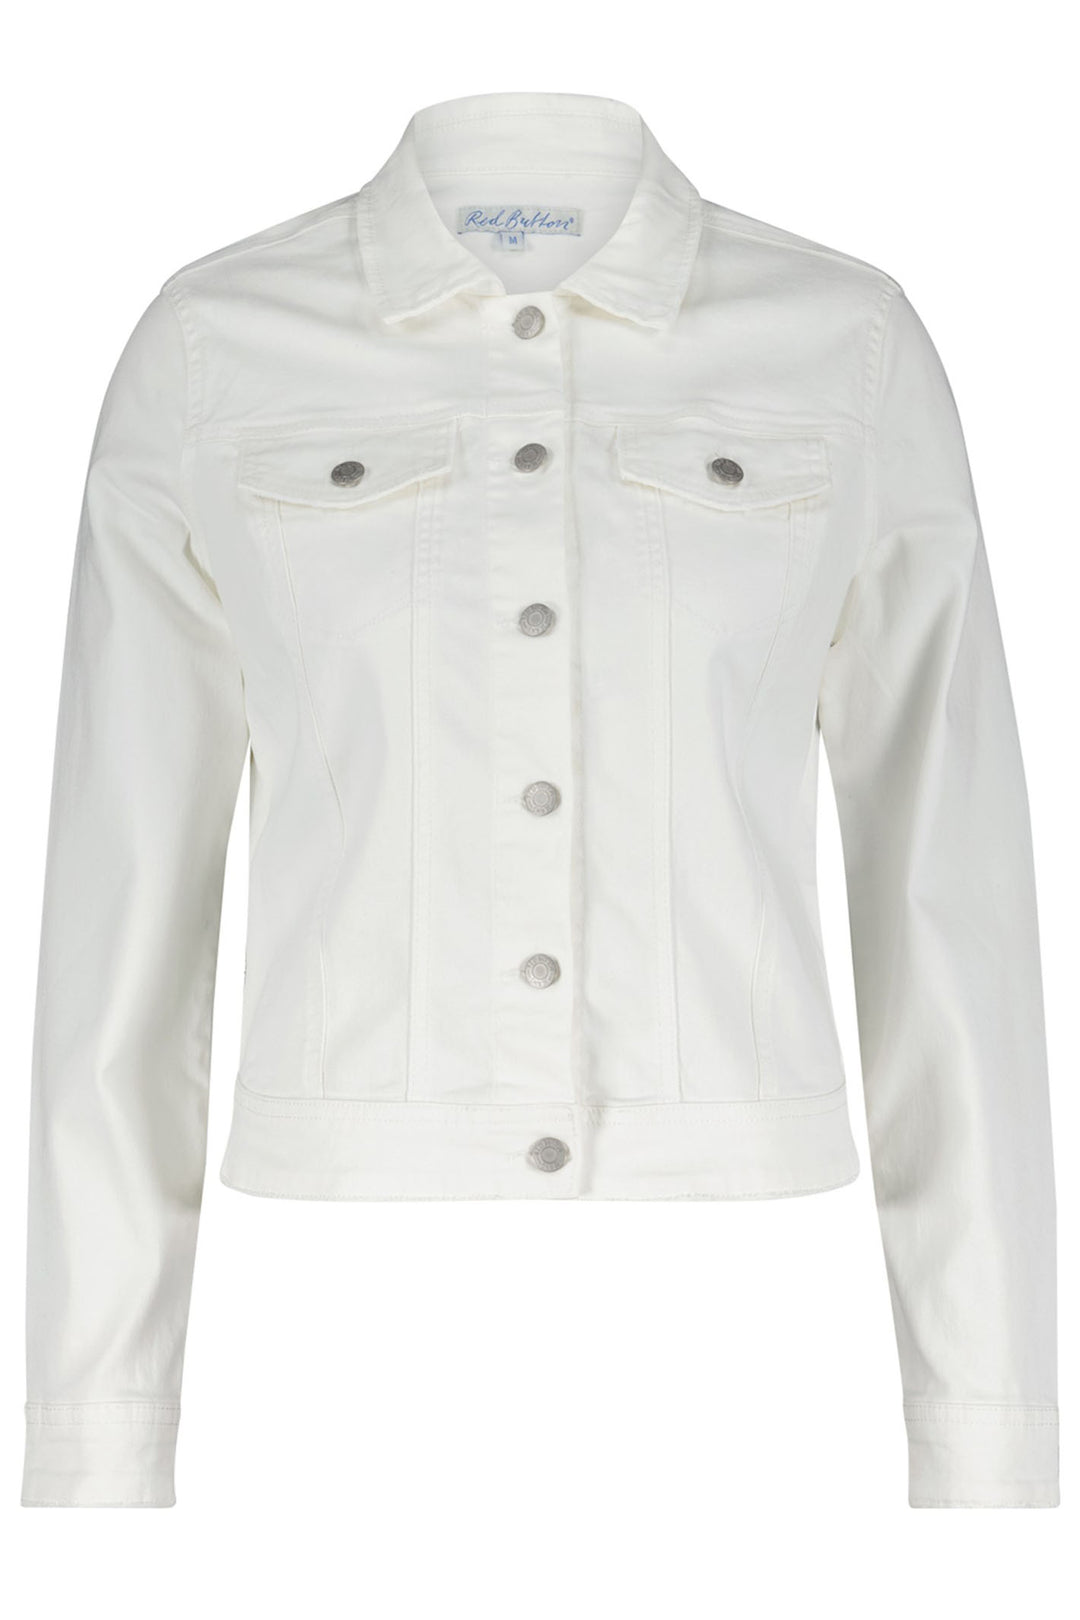 Red Button SRB4218 Jackie Off White Denim Style Jacket - Dotique